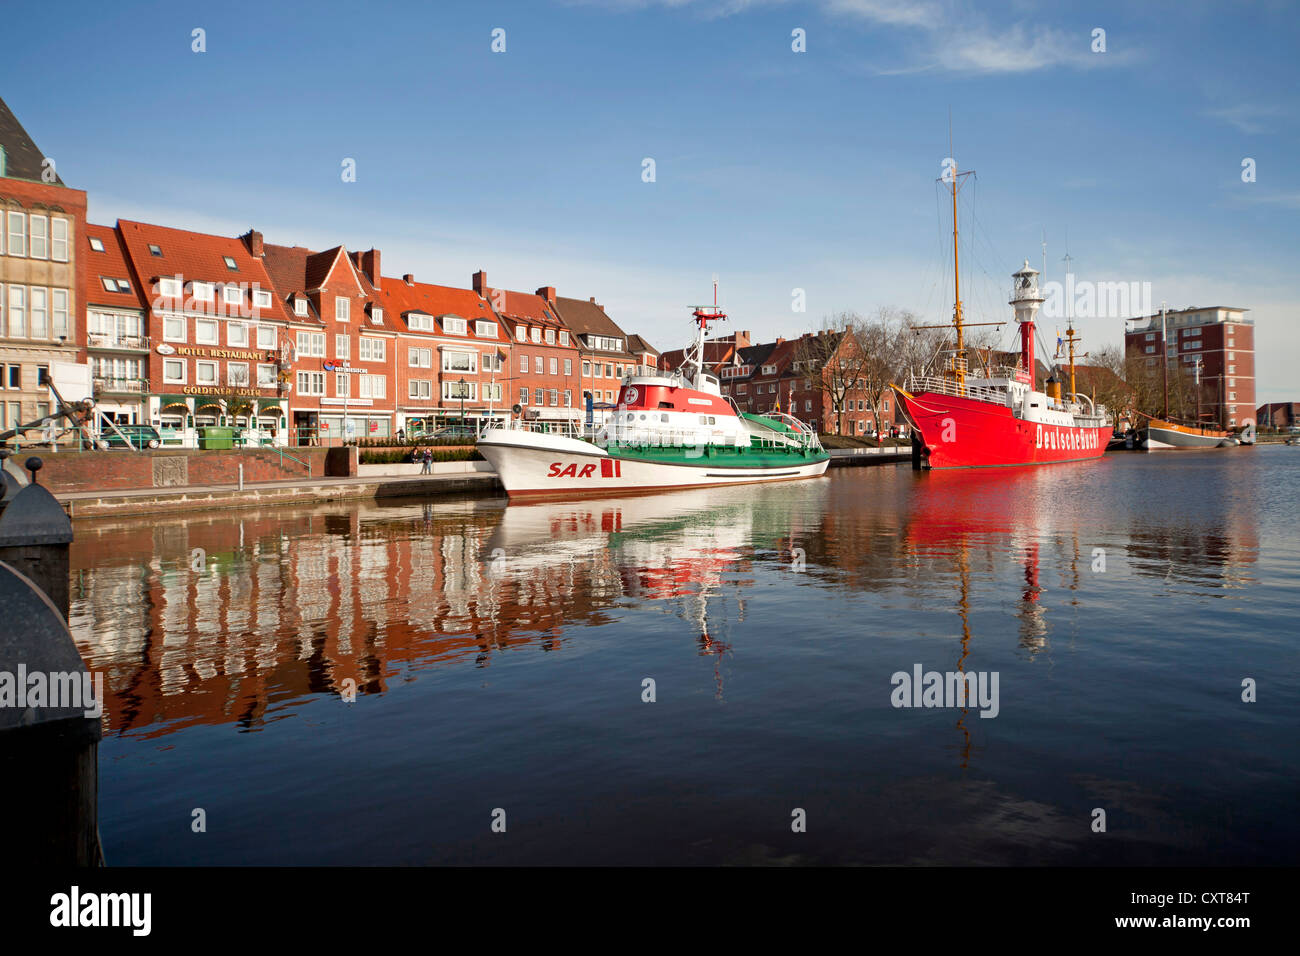 Museum ships are reflected in the water of the Ratsdelft in the harbour of Emden, East Frisia, Lower Saxony, Germany Stock Photo